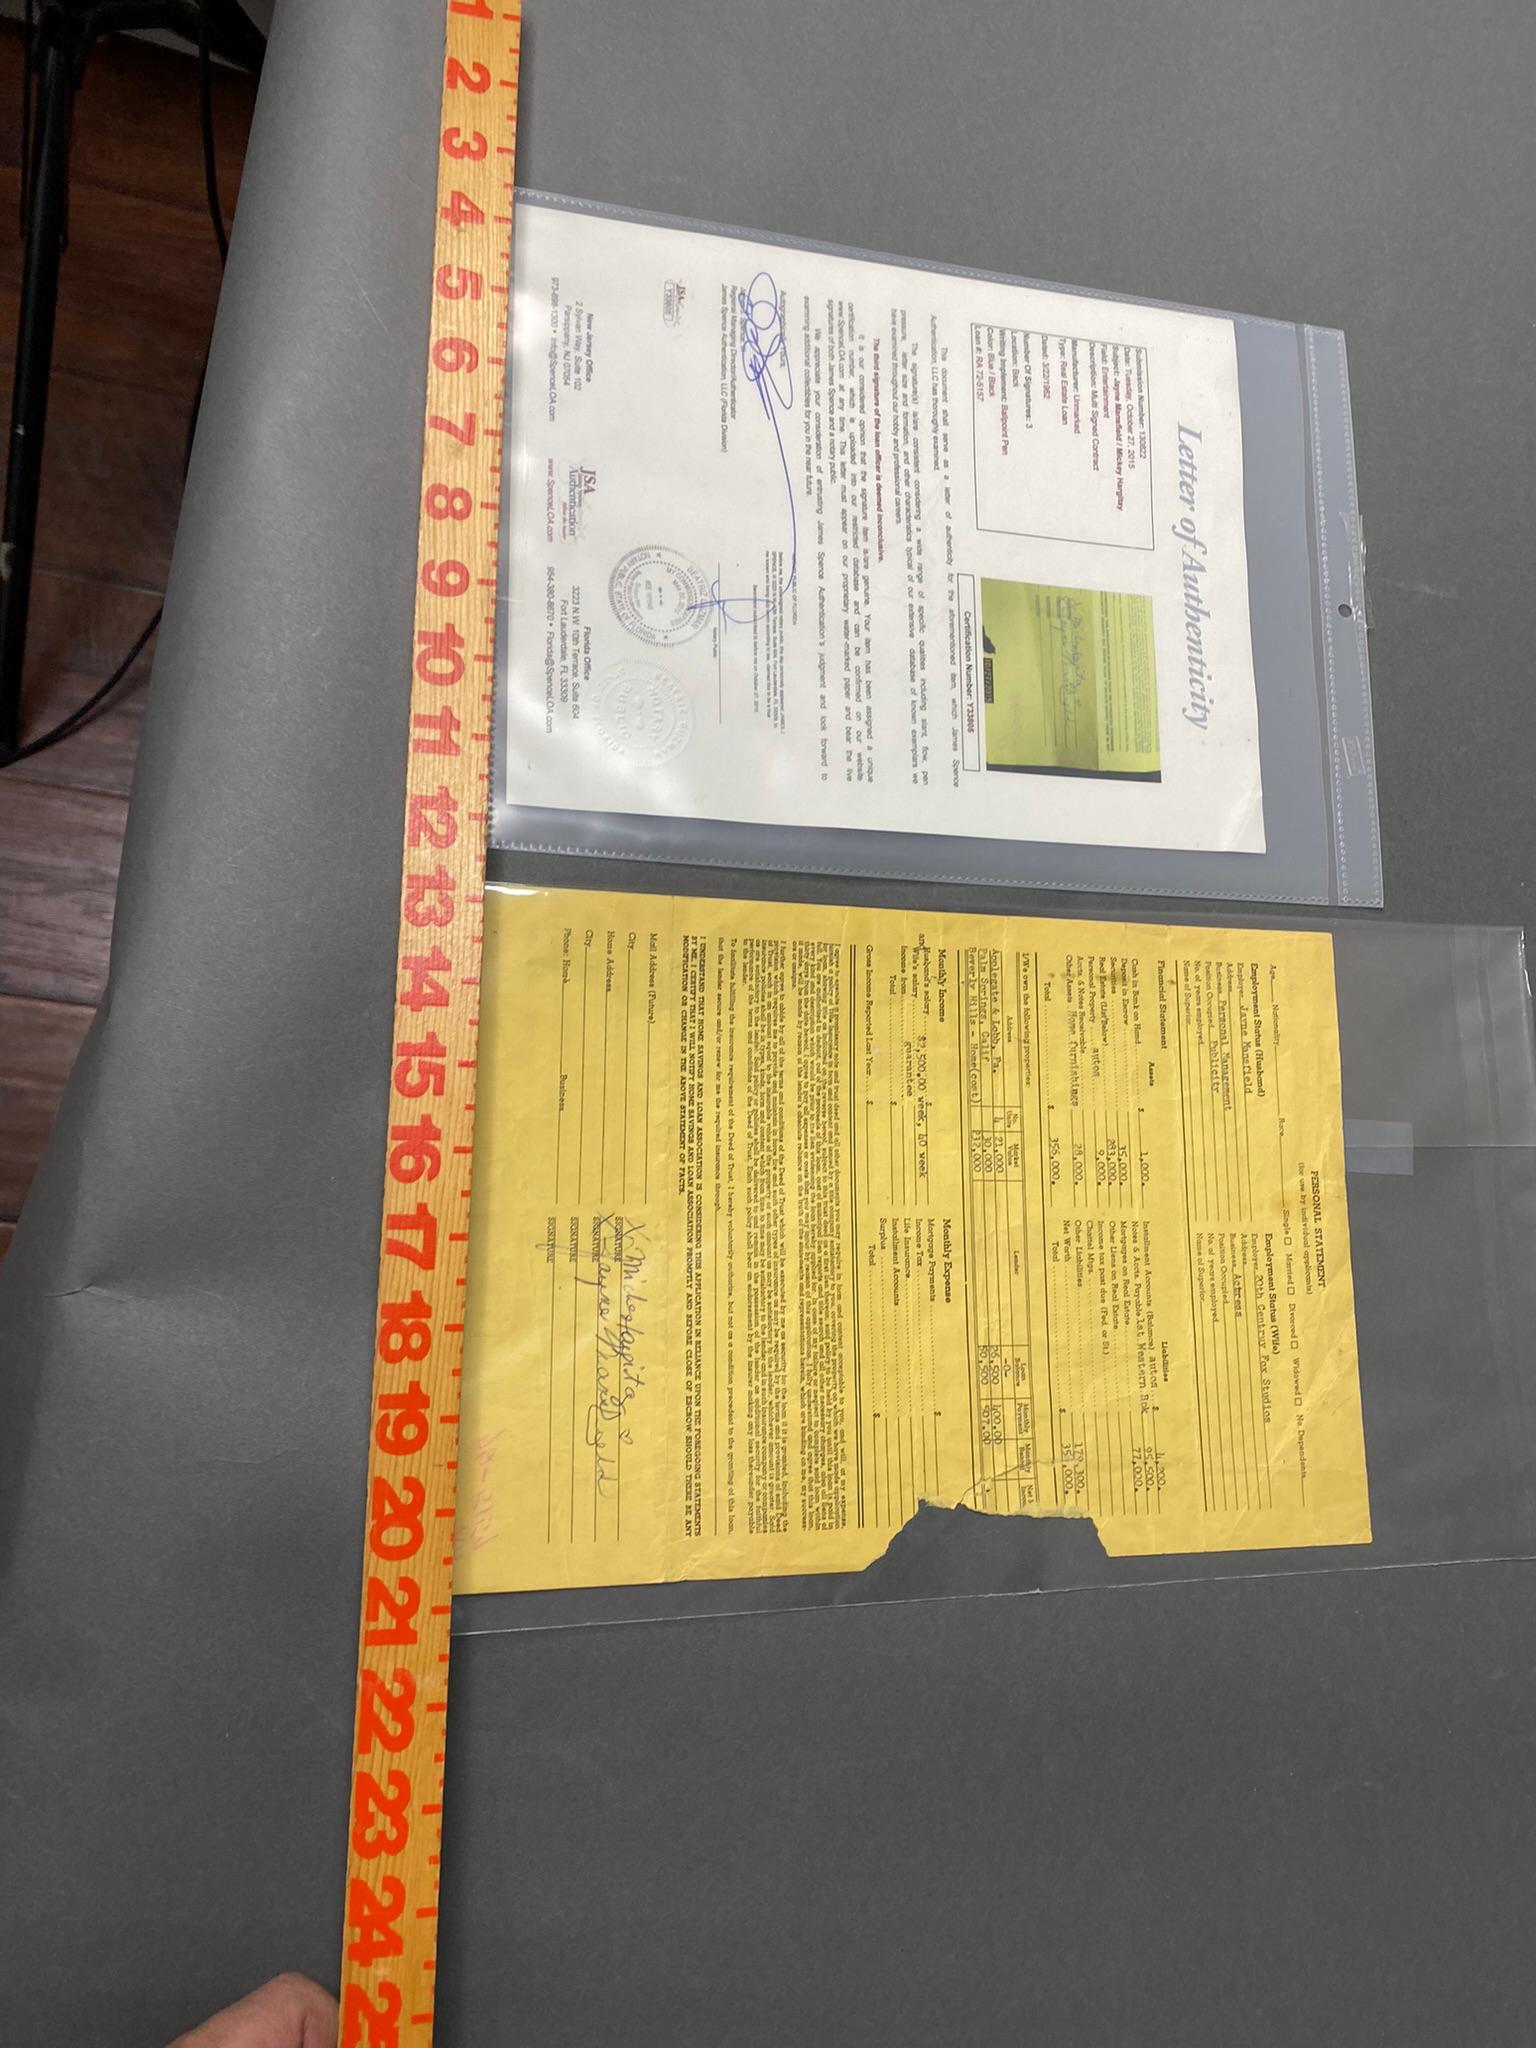 Rare Jayne Mansfield Pink Palace Beverly Hills Mortgage Loan Document